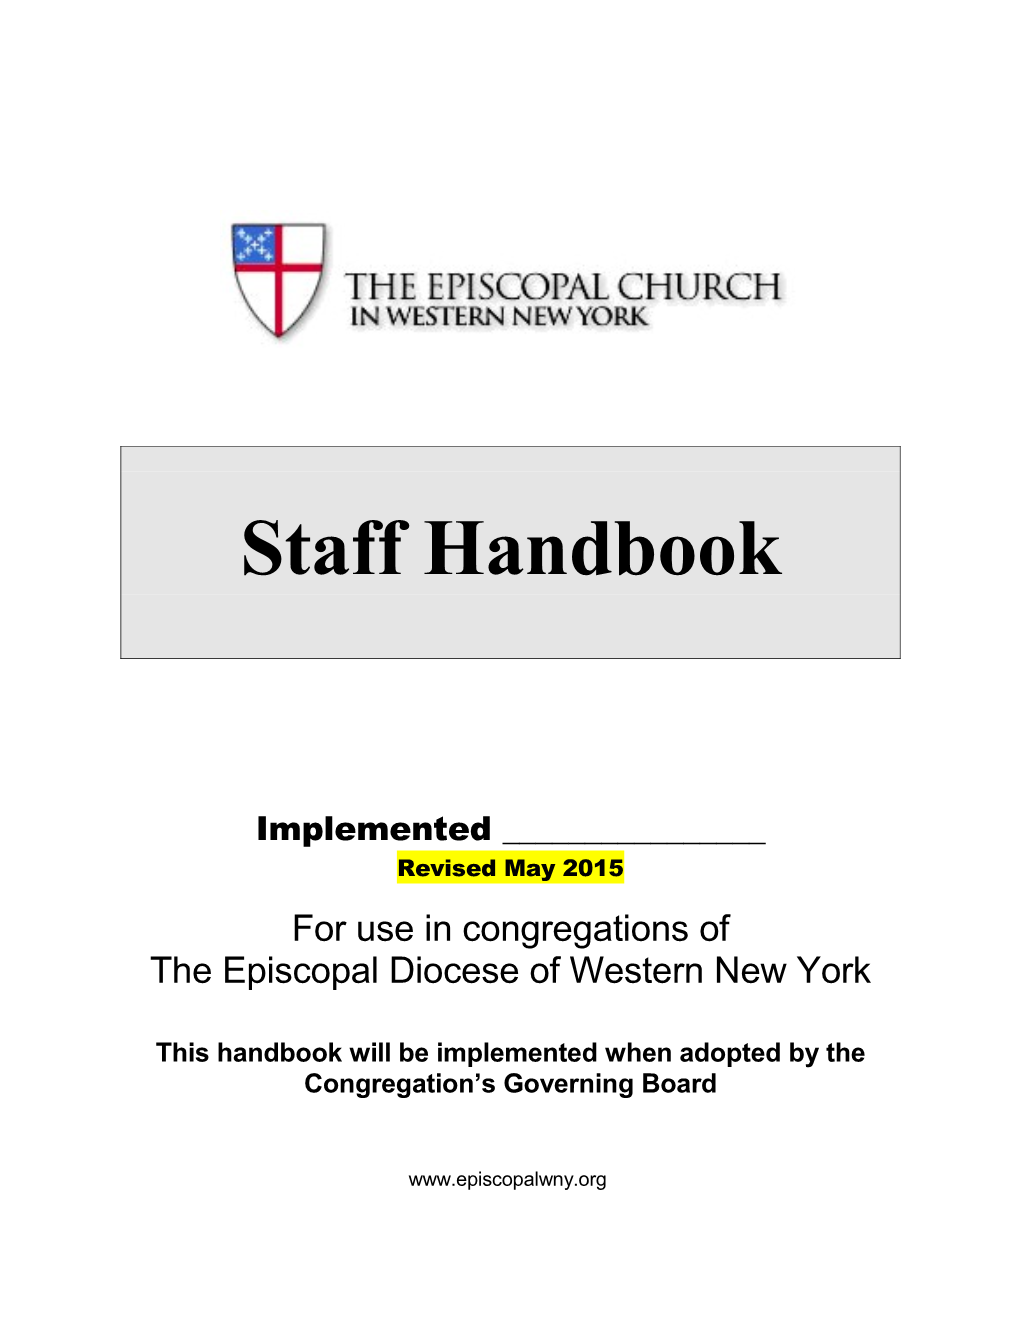 This Handbook Will Be Implemented When Adopted by the Congregation S Governing Board